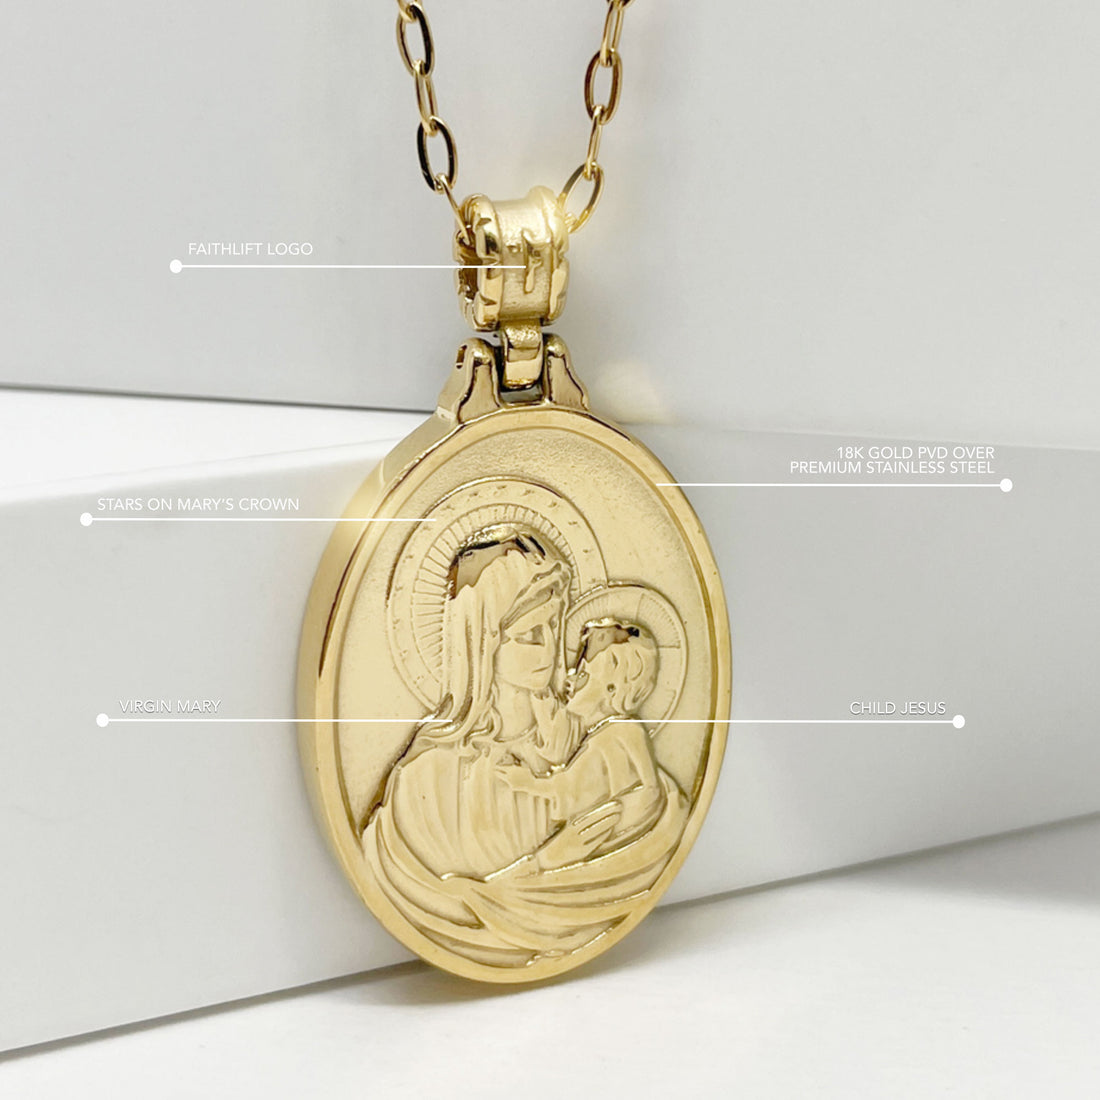 Our Lady of Perpetual Help Necklace: A Symbol of Divine Comfort and Guidance